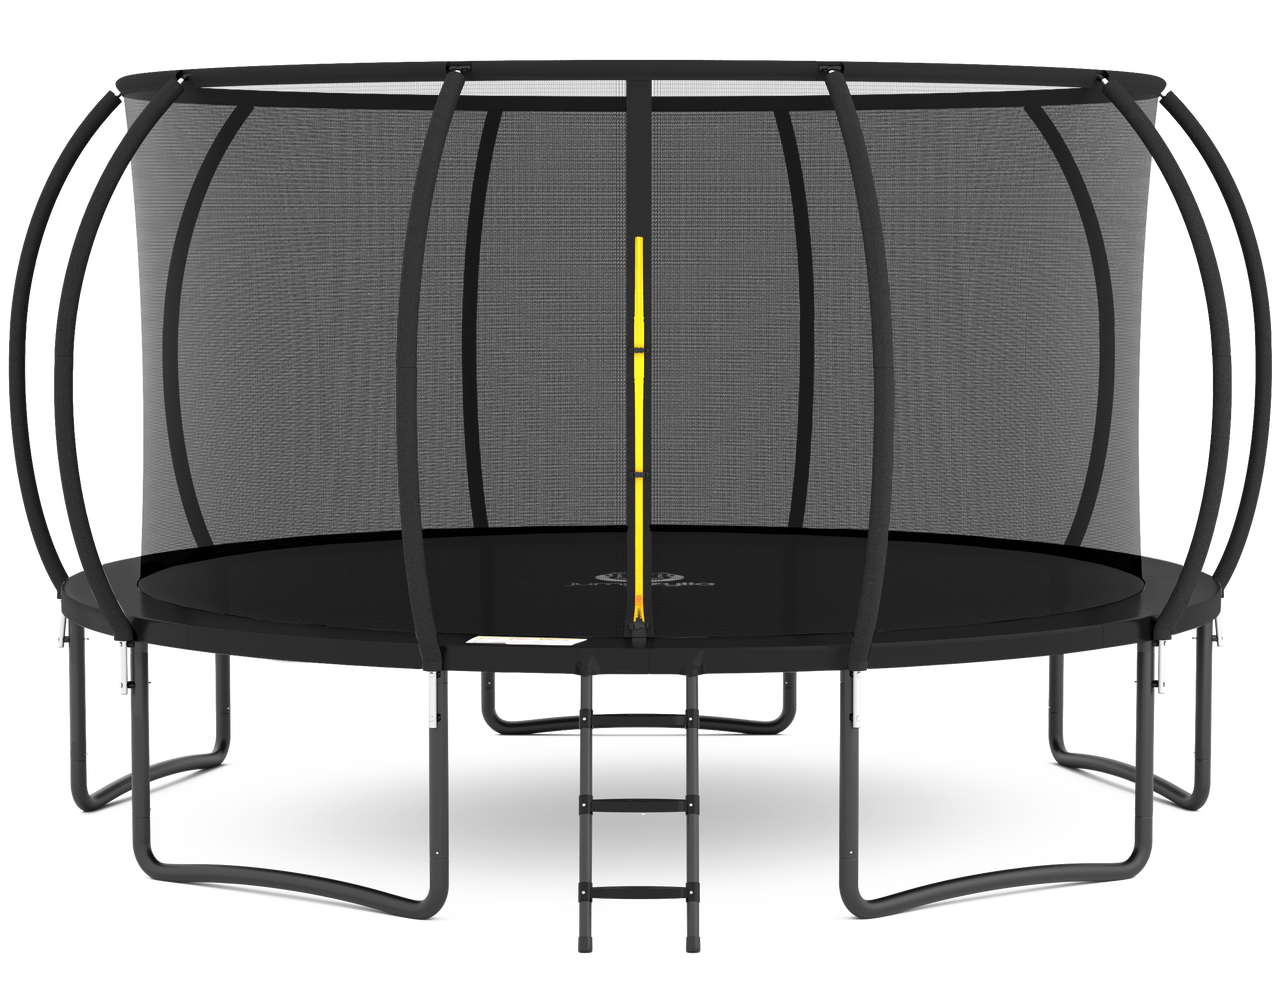 Jumpzylla 15FT Trampoline with Enclosure & Double Color Pad Cover